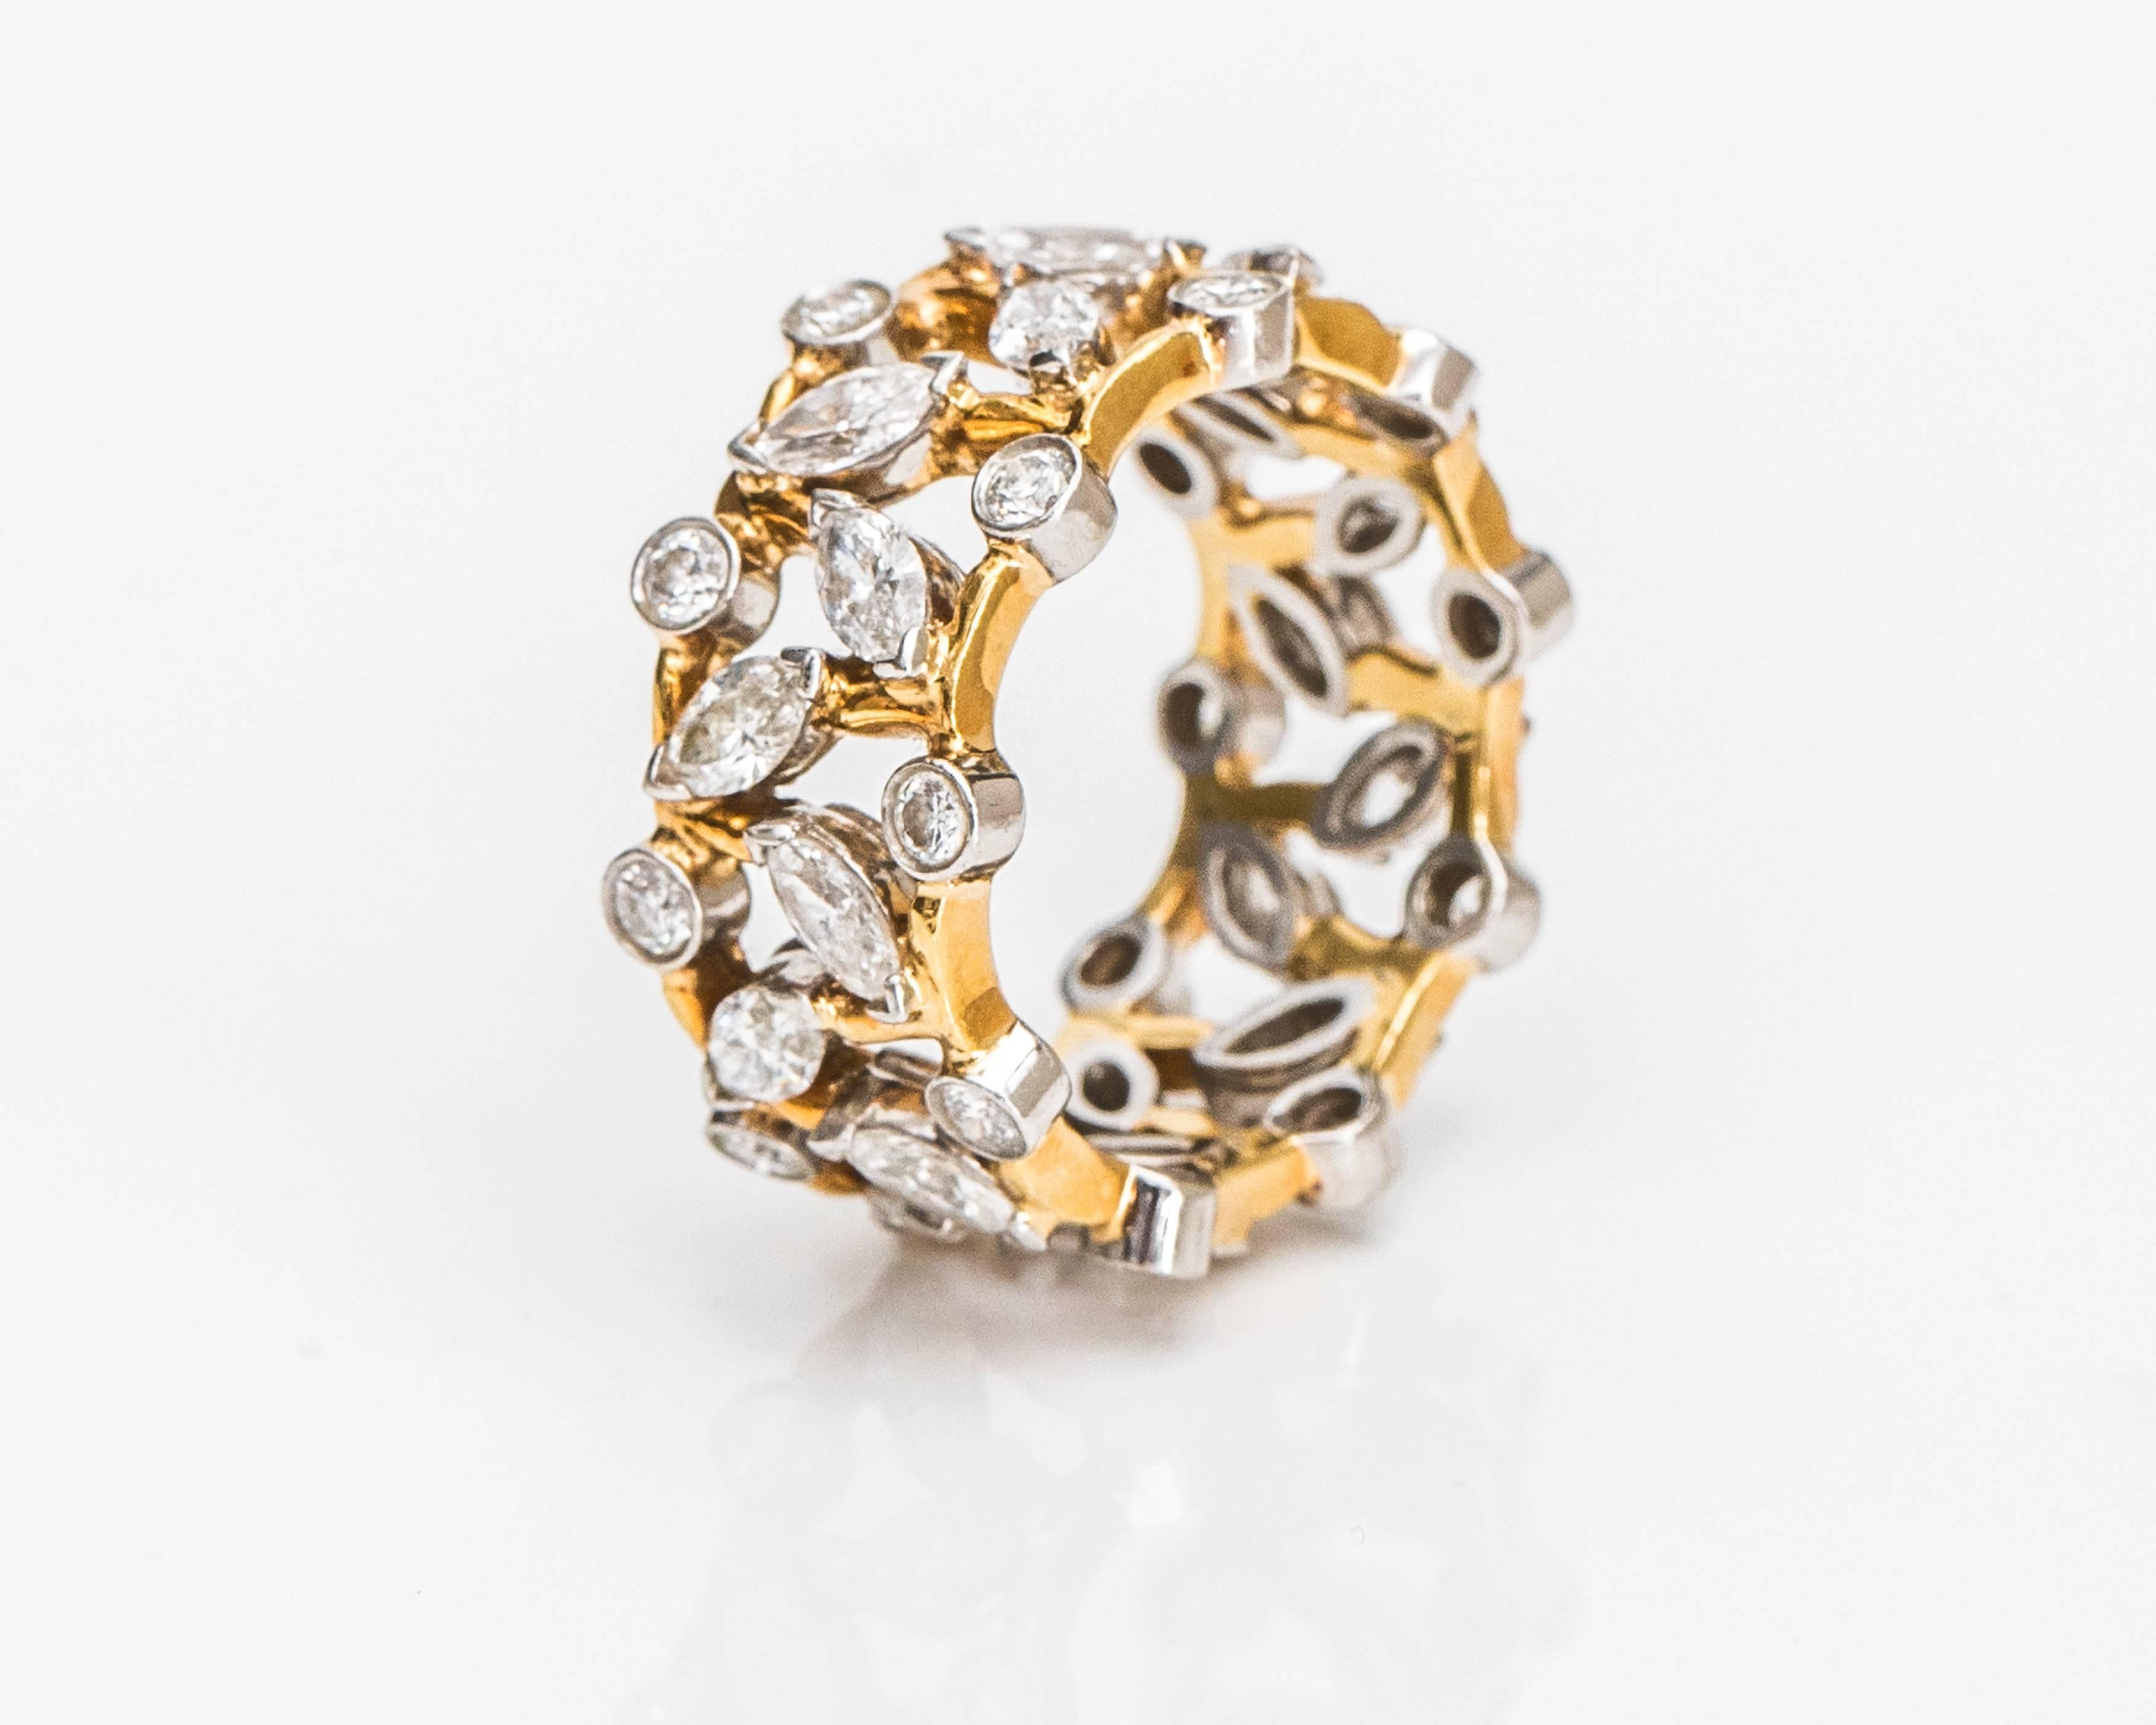 Intricate and stunningly elegant, this Tiffany and Co Diamond Platinum and 18 Karat Yellow Gold Ring is a Jean Schlumberger timeless original design. The world's most fashionable women, including Jacqueline Onassis and legendary Vogue editor Diana